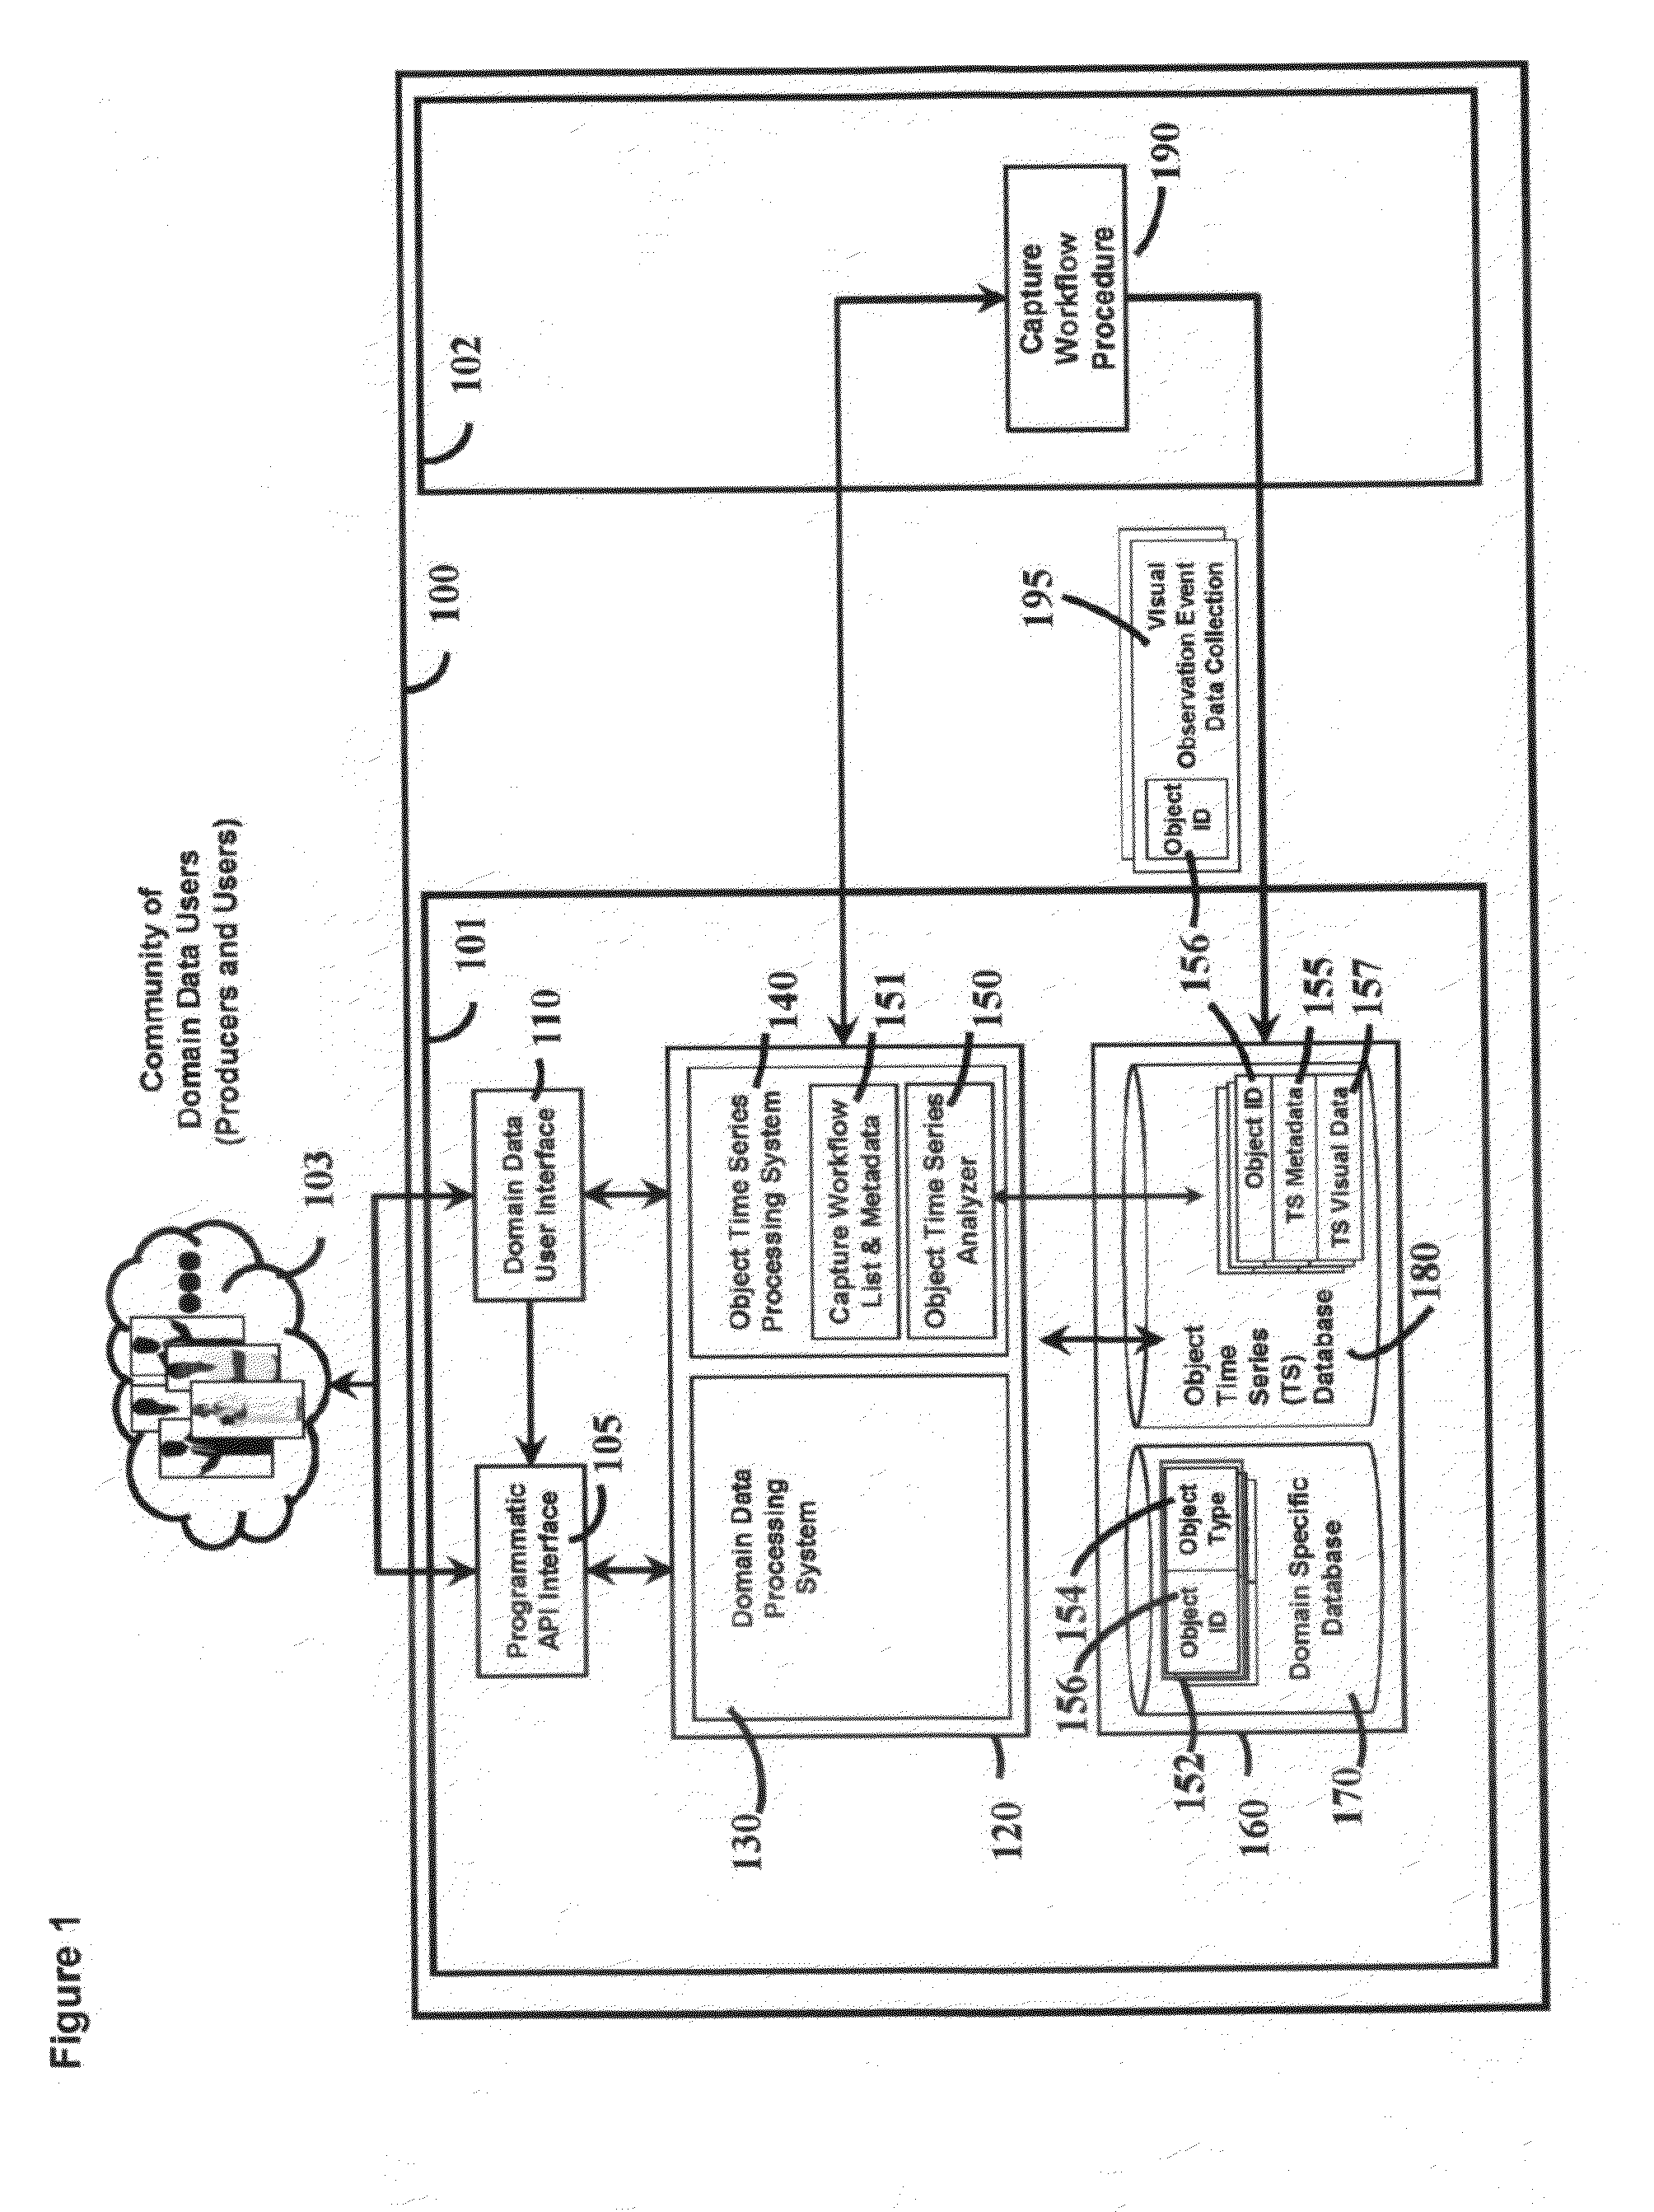 System for automatic organization and communication of visual data based on domain knowledge